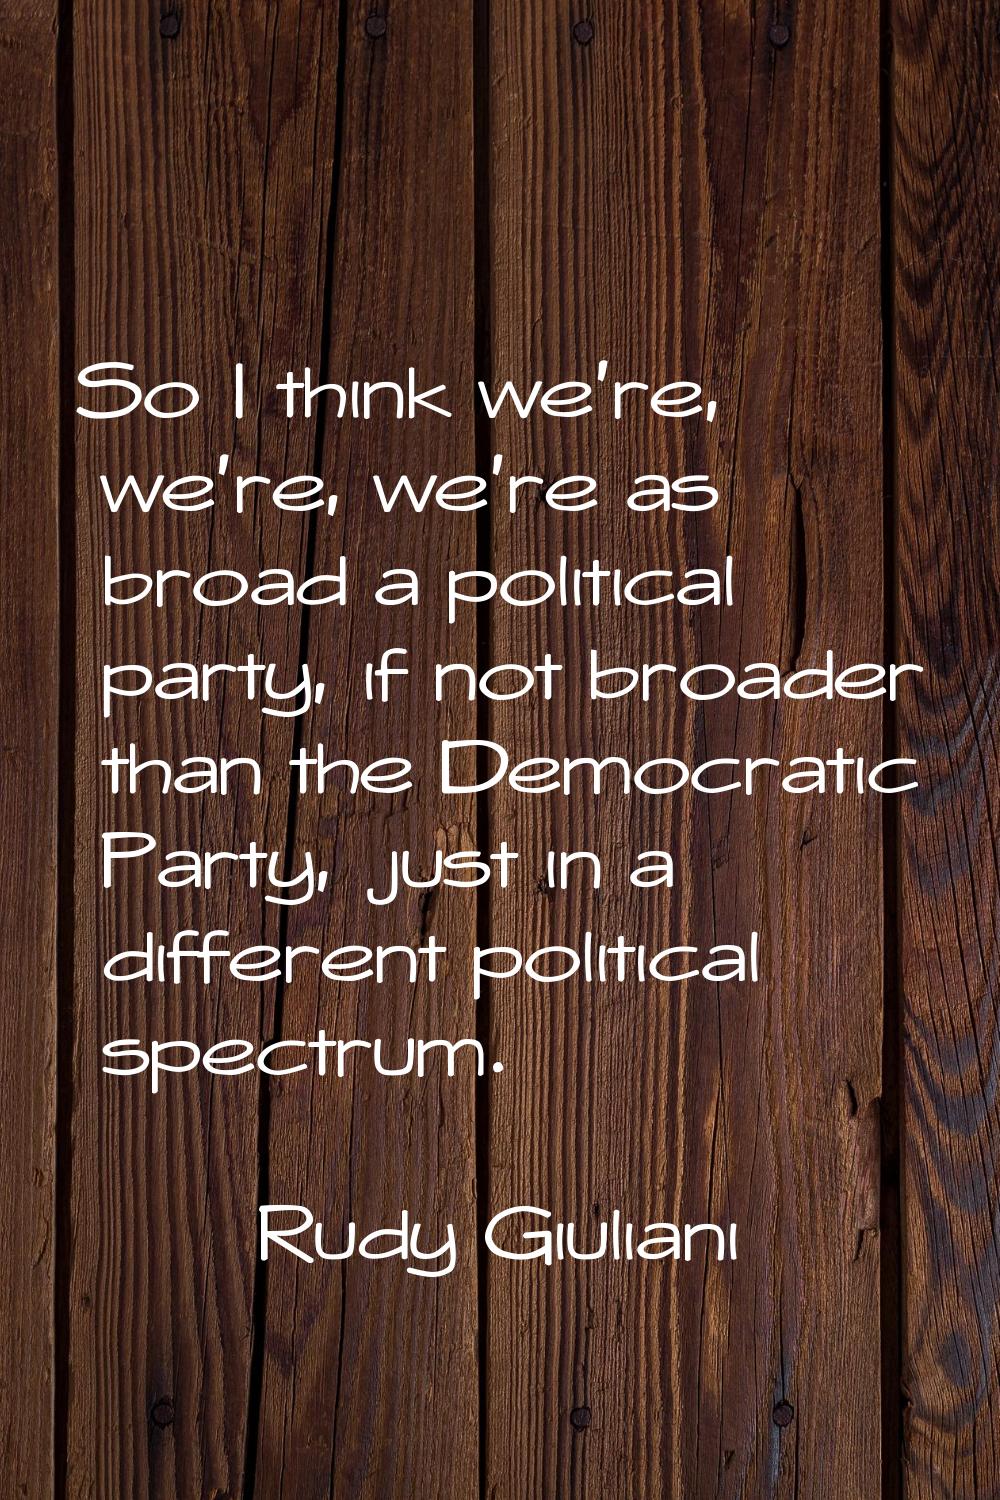 So I think we're, we're, we're as broad a political party, if not broader than the Democratic Party